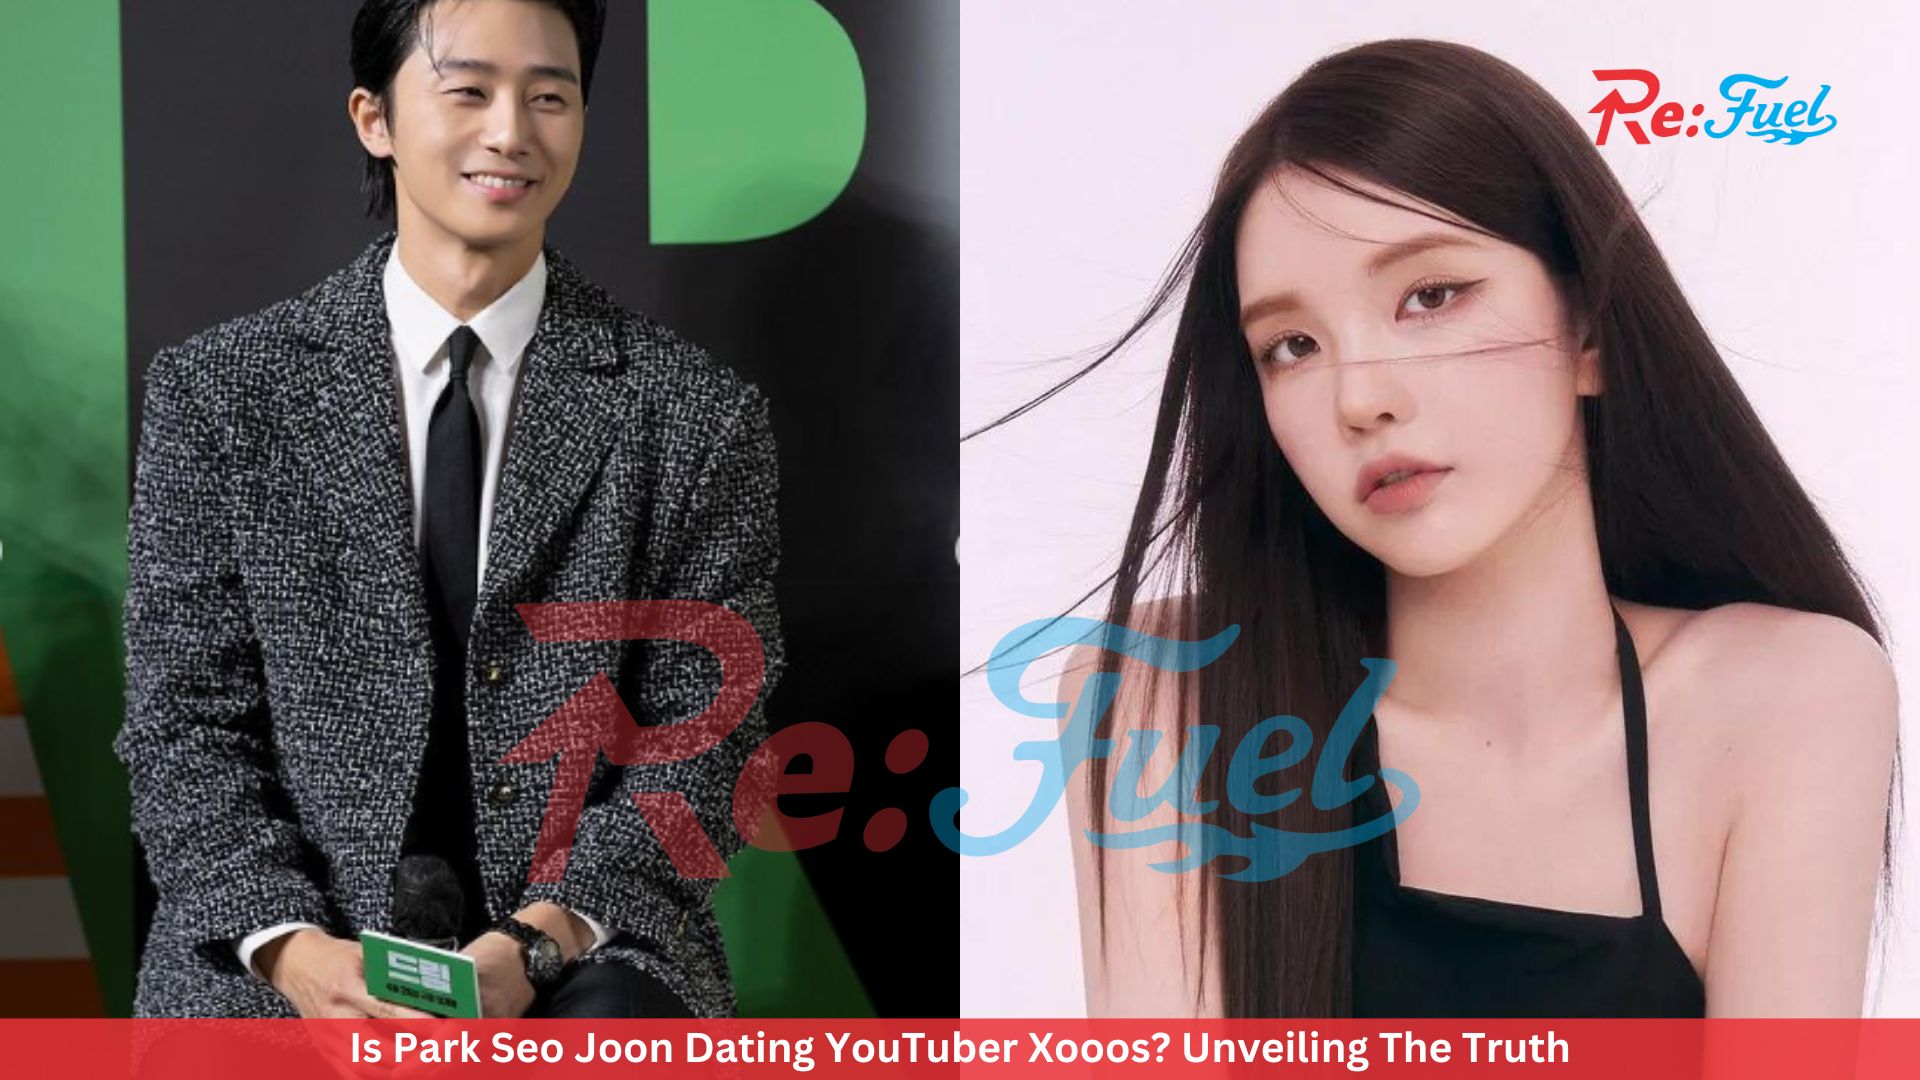 Is Park Seo Joon Dating YouTuber Xooos? Unveiling The Truth